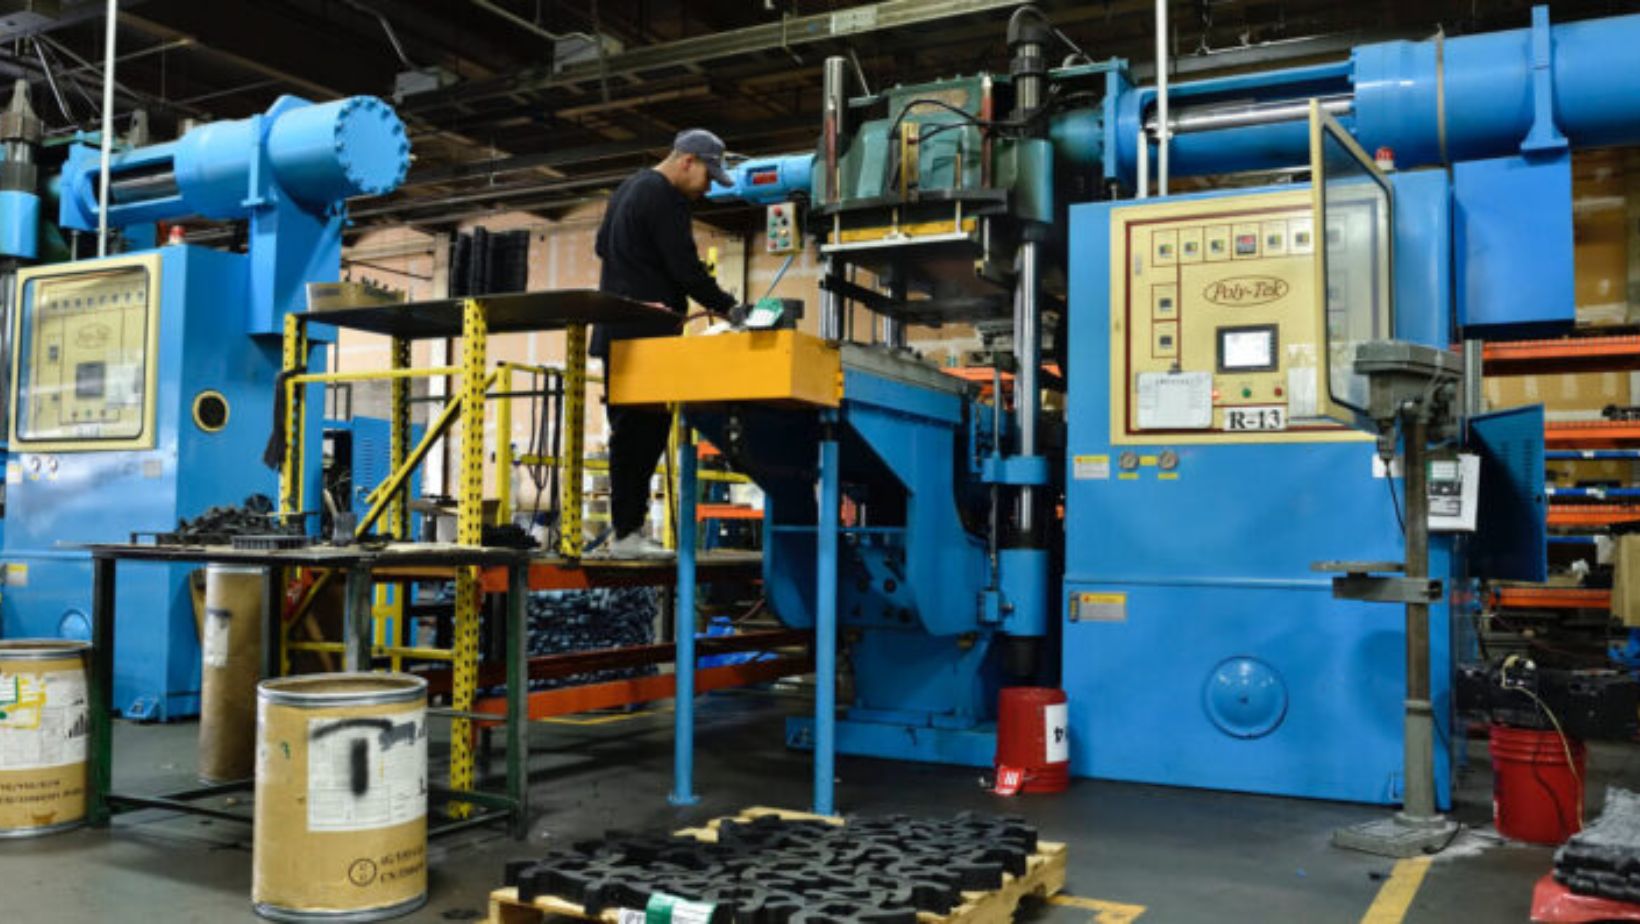 4 Factors for Choosing Reaction Injection Molding Services